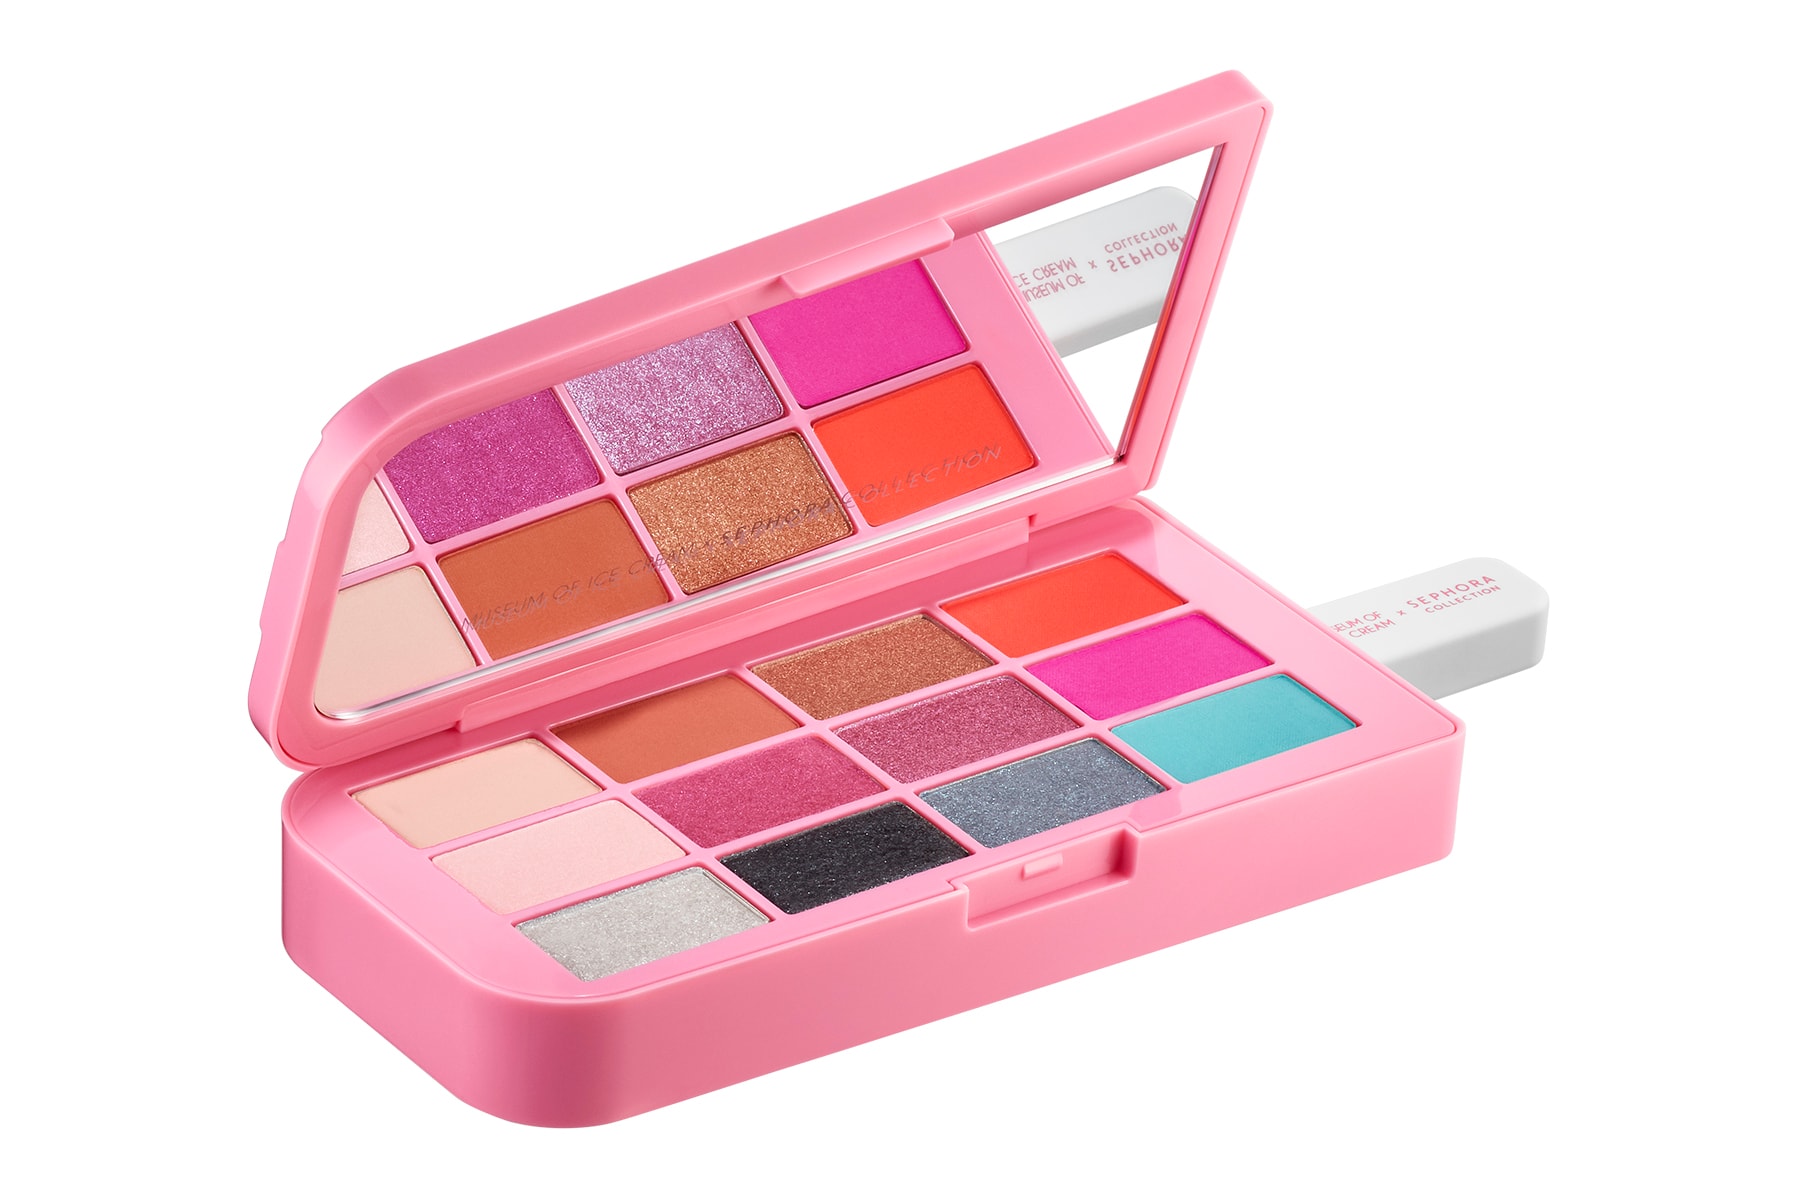 Museum of Ice Cream Sephora Makeup Collaboration Beauty popsicle Eyeshadow Palette Icicle